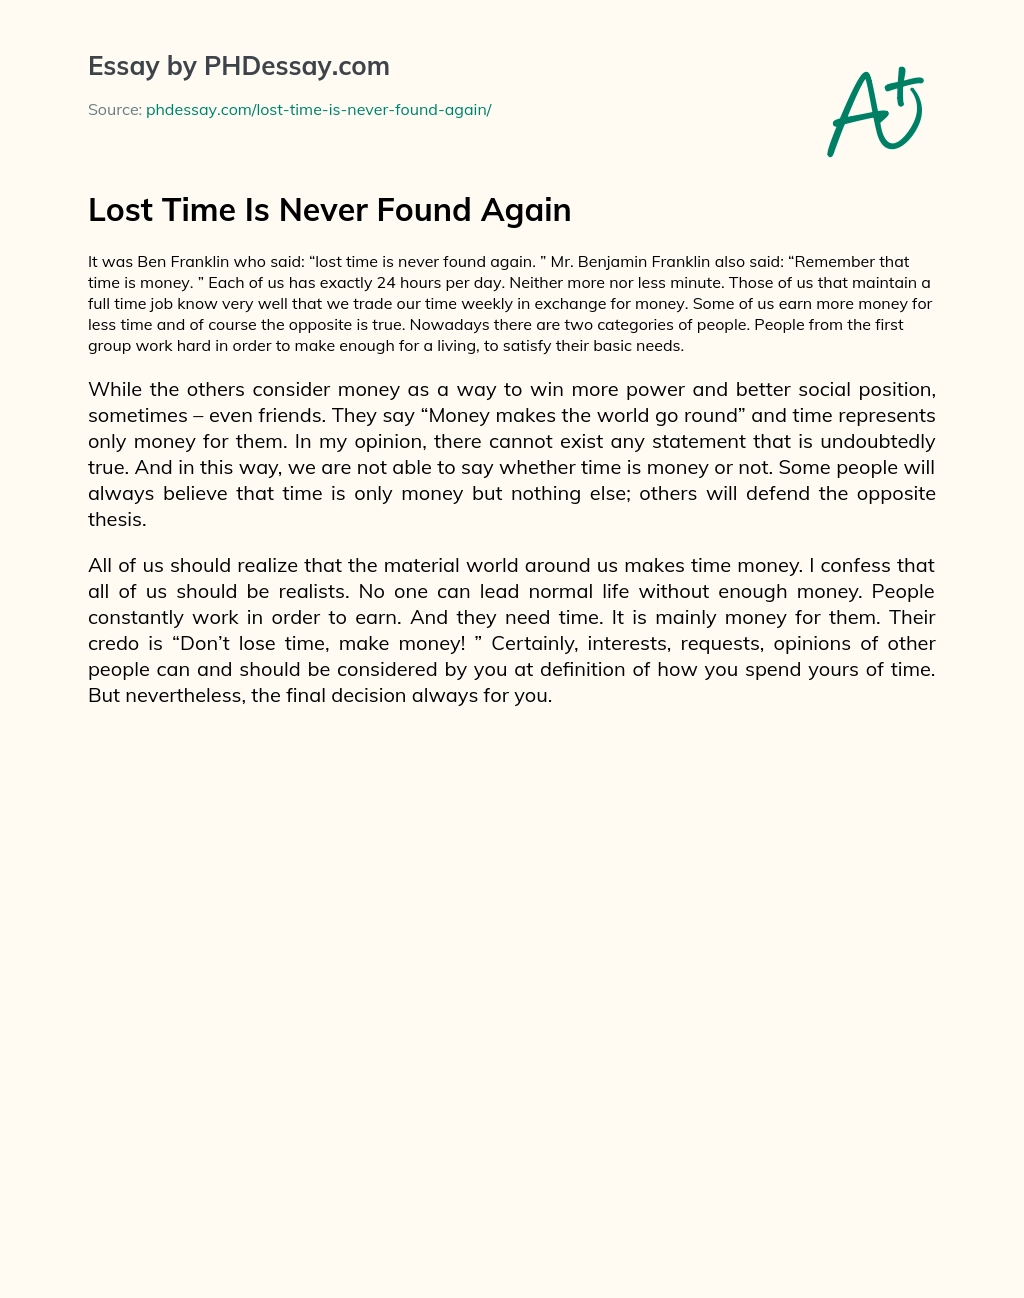 Lost Time Is Never Found Again essay